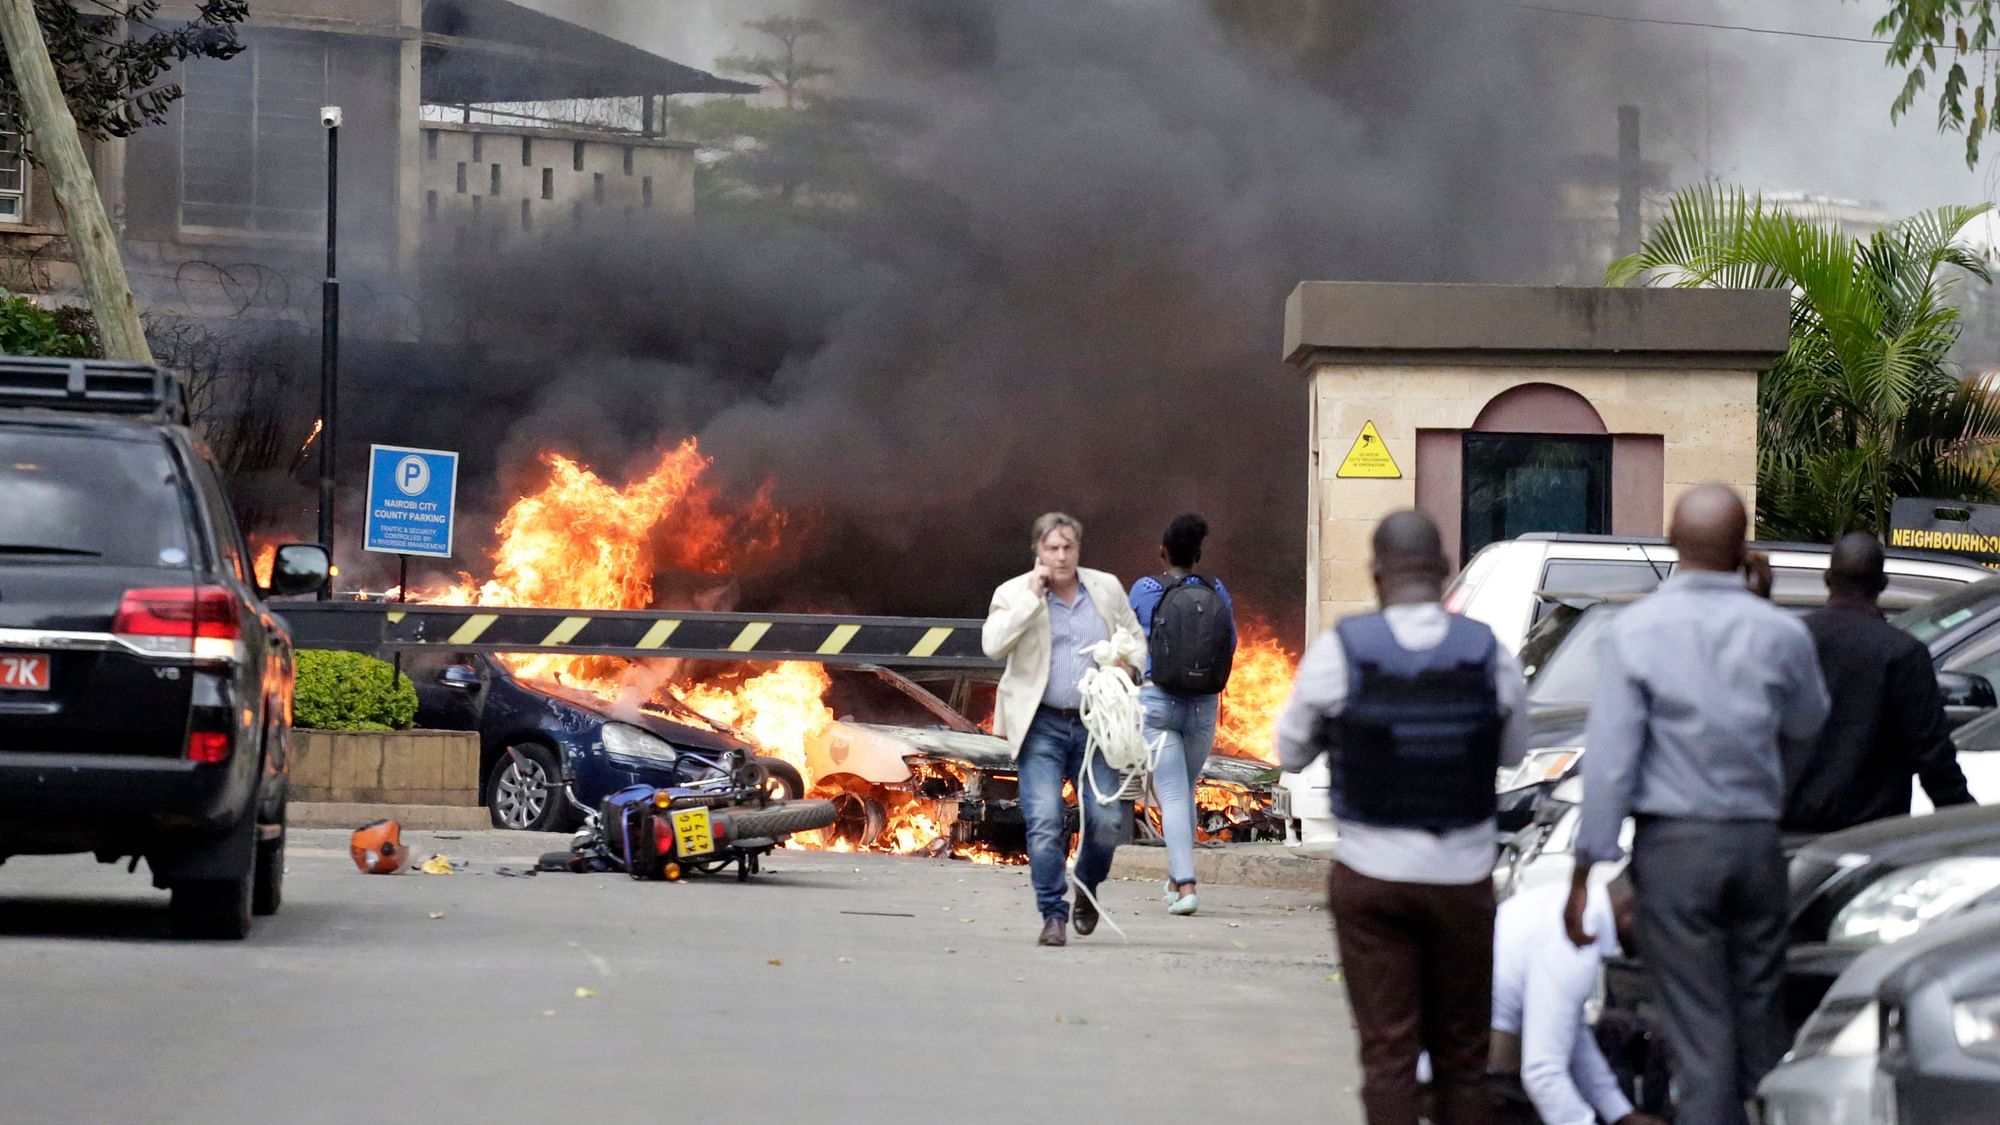 A police officer said that at least 15 people were killed in the Nairobi attack.